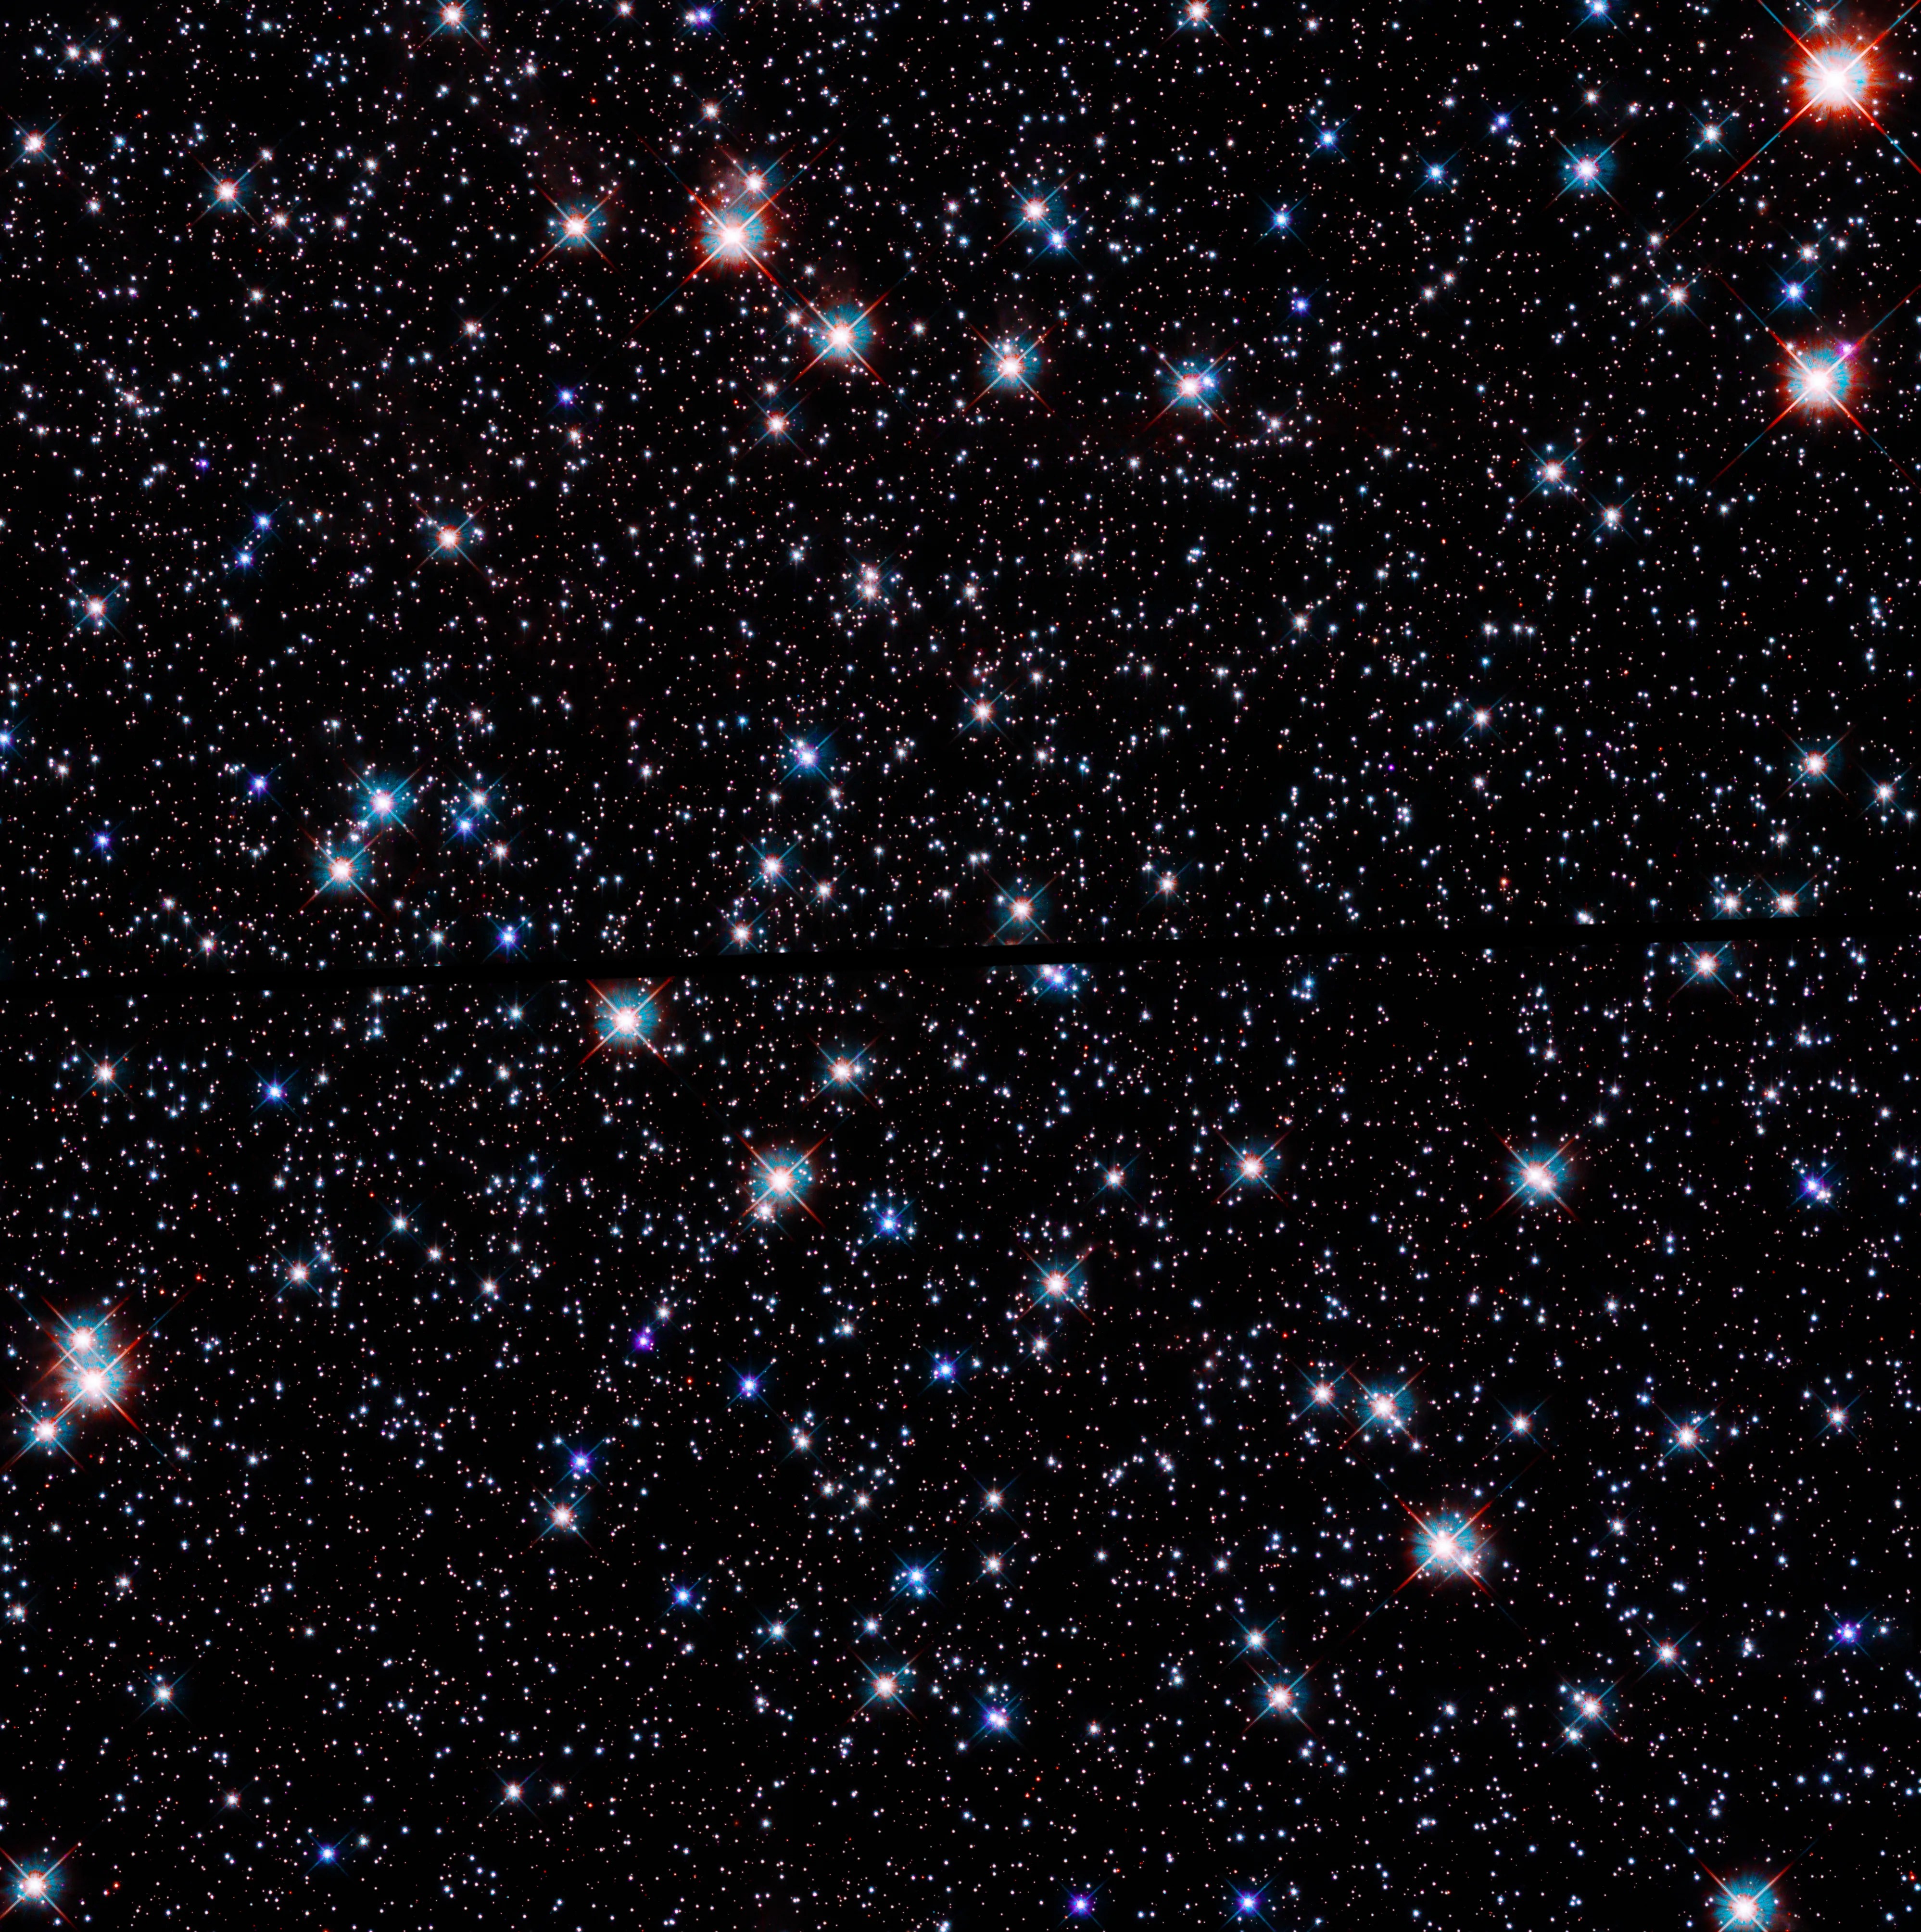 Scattered blue and white stars against a black background. A black line runs horizontally through the image.